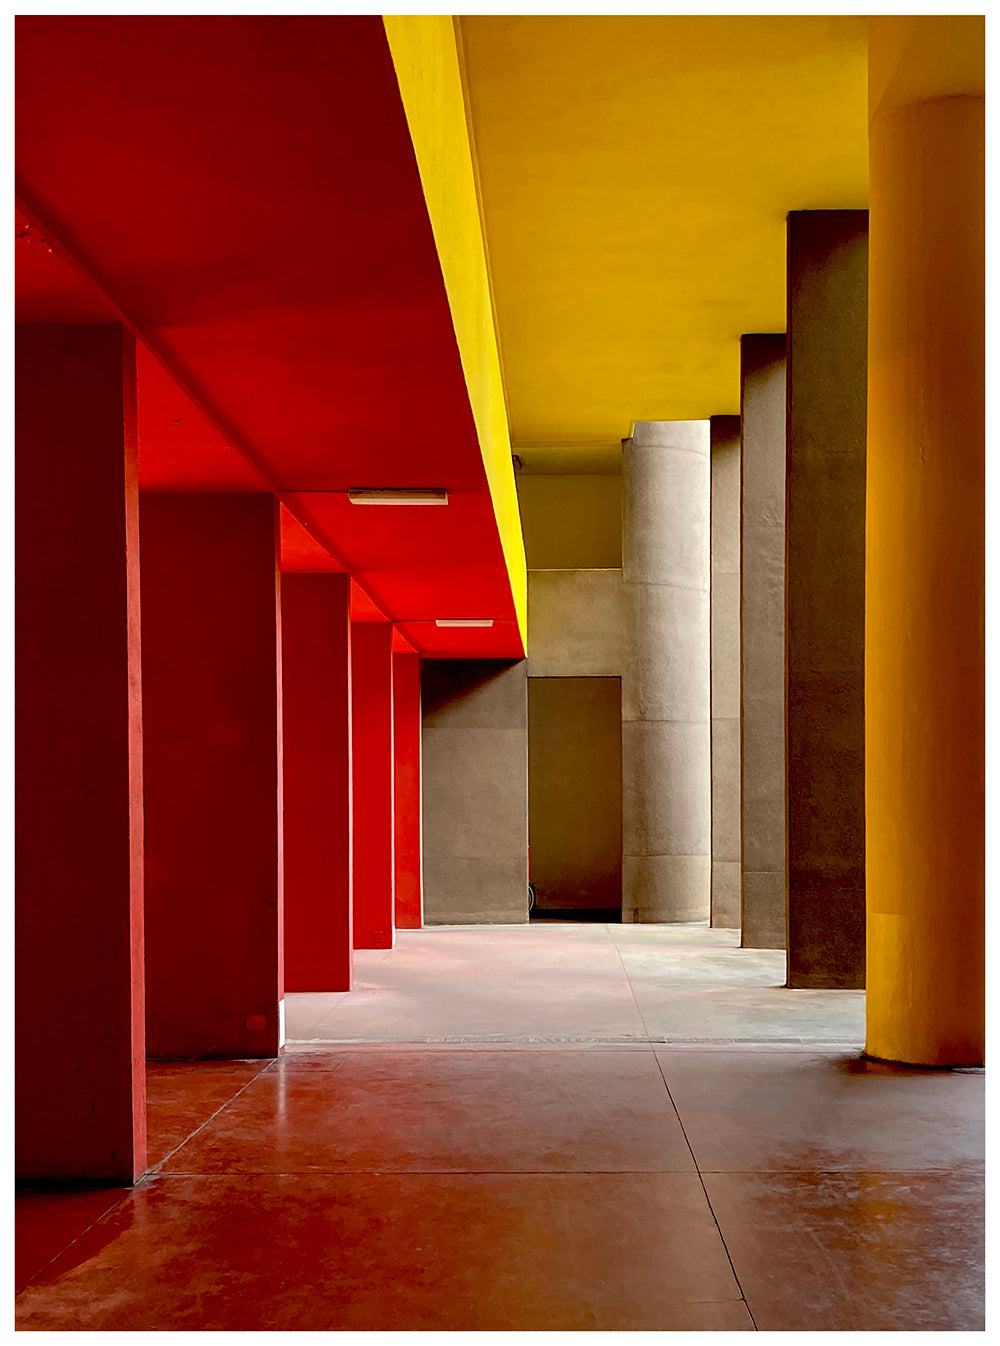 Monte Amiata housing, Gallaratese Quarter, Milan. Red and yellow brutalist architecture photograph by Richard Heeps.